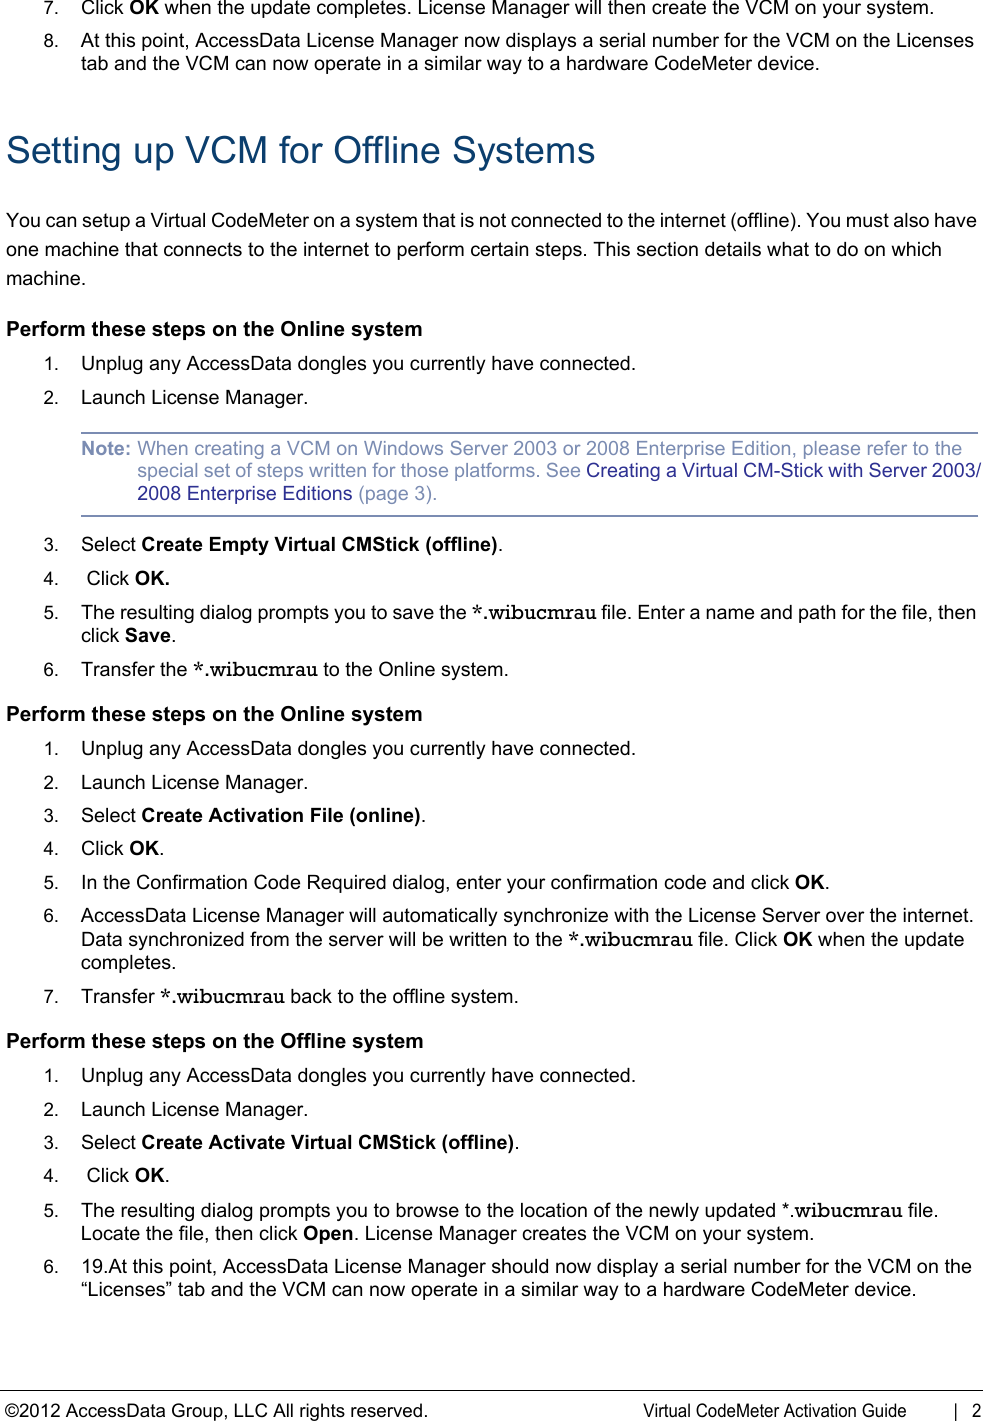 Page 2 of 5 - Vitual Code Meter Activation Guide